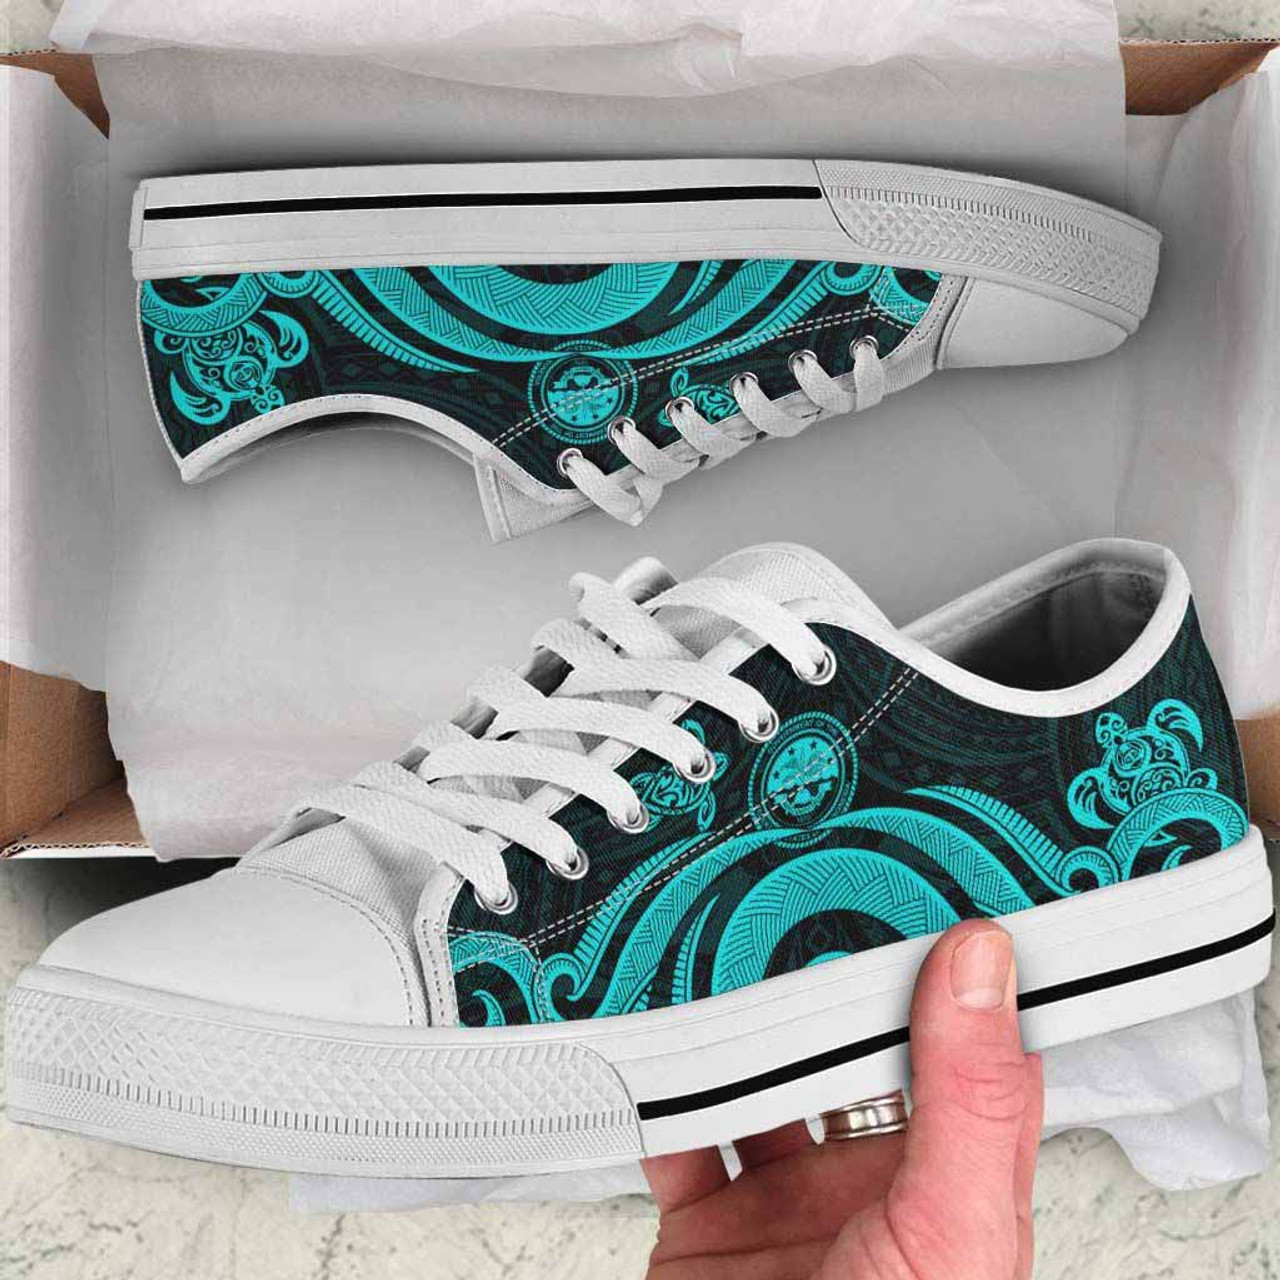 Federated States of Micronesia Low Top Canvas Shoes - Turquoise Tentacle Turtle 8